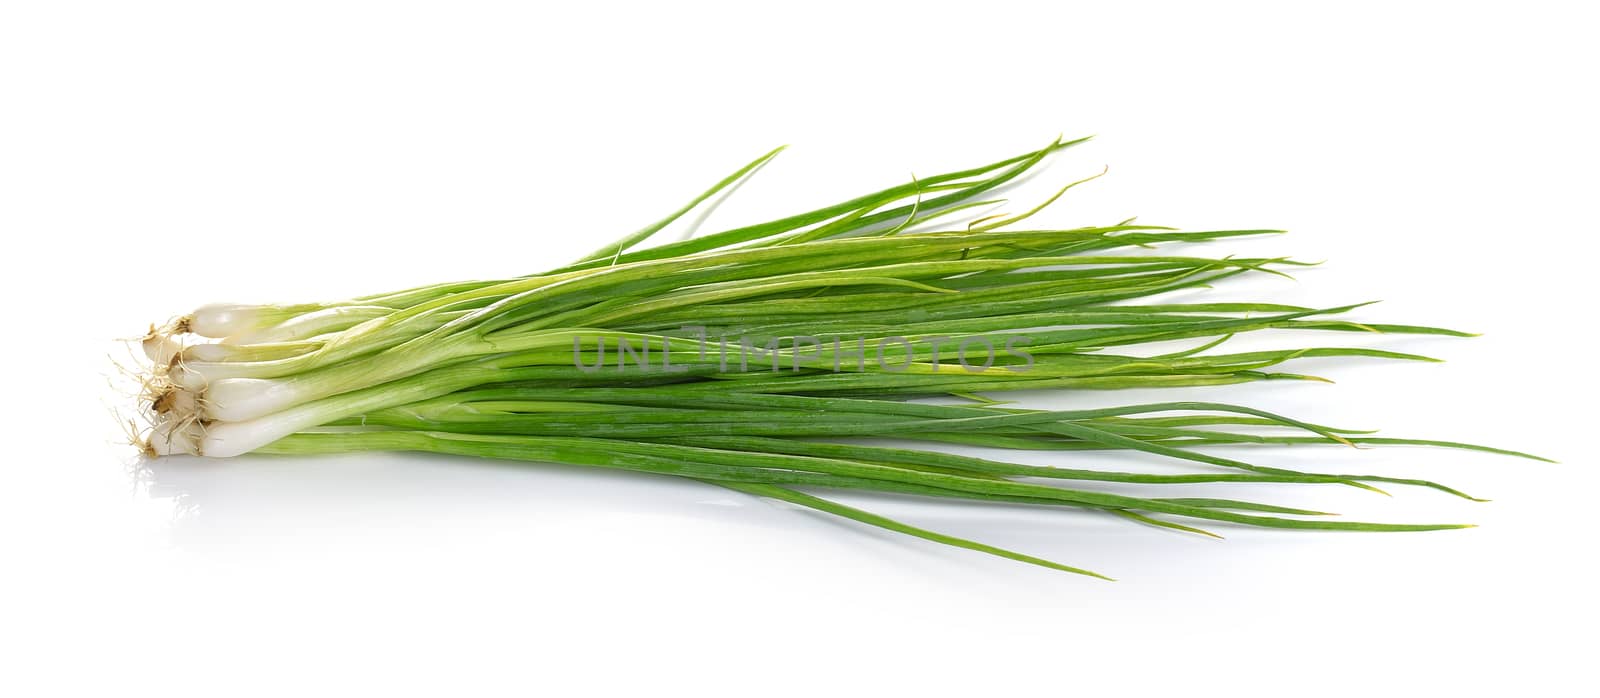 Green onion isolated on the white background by sommai